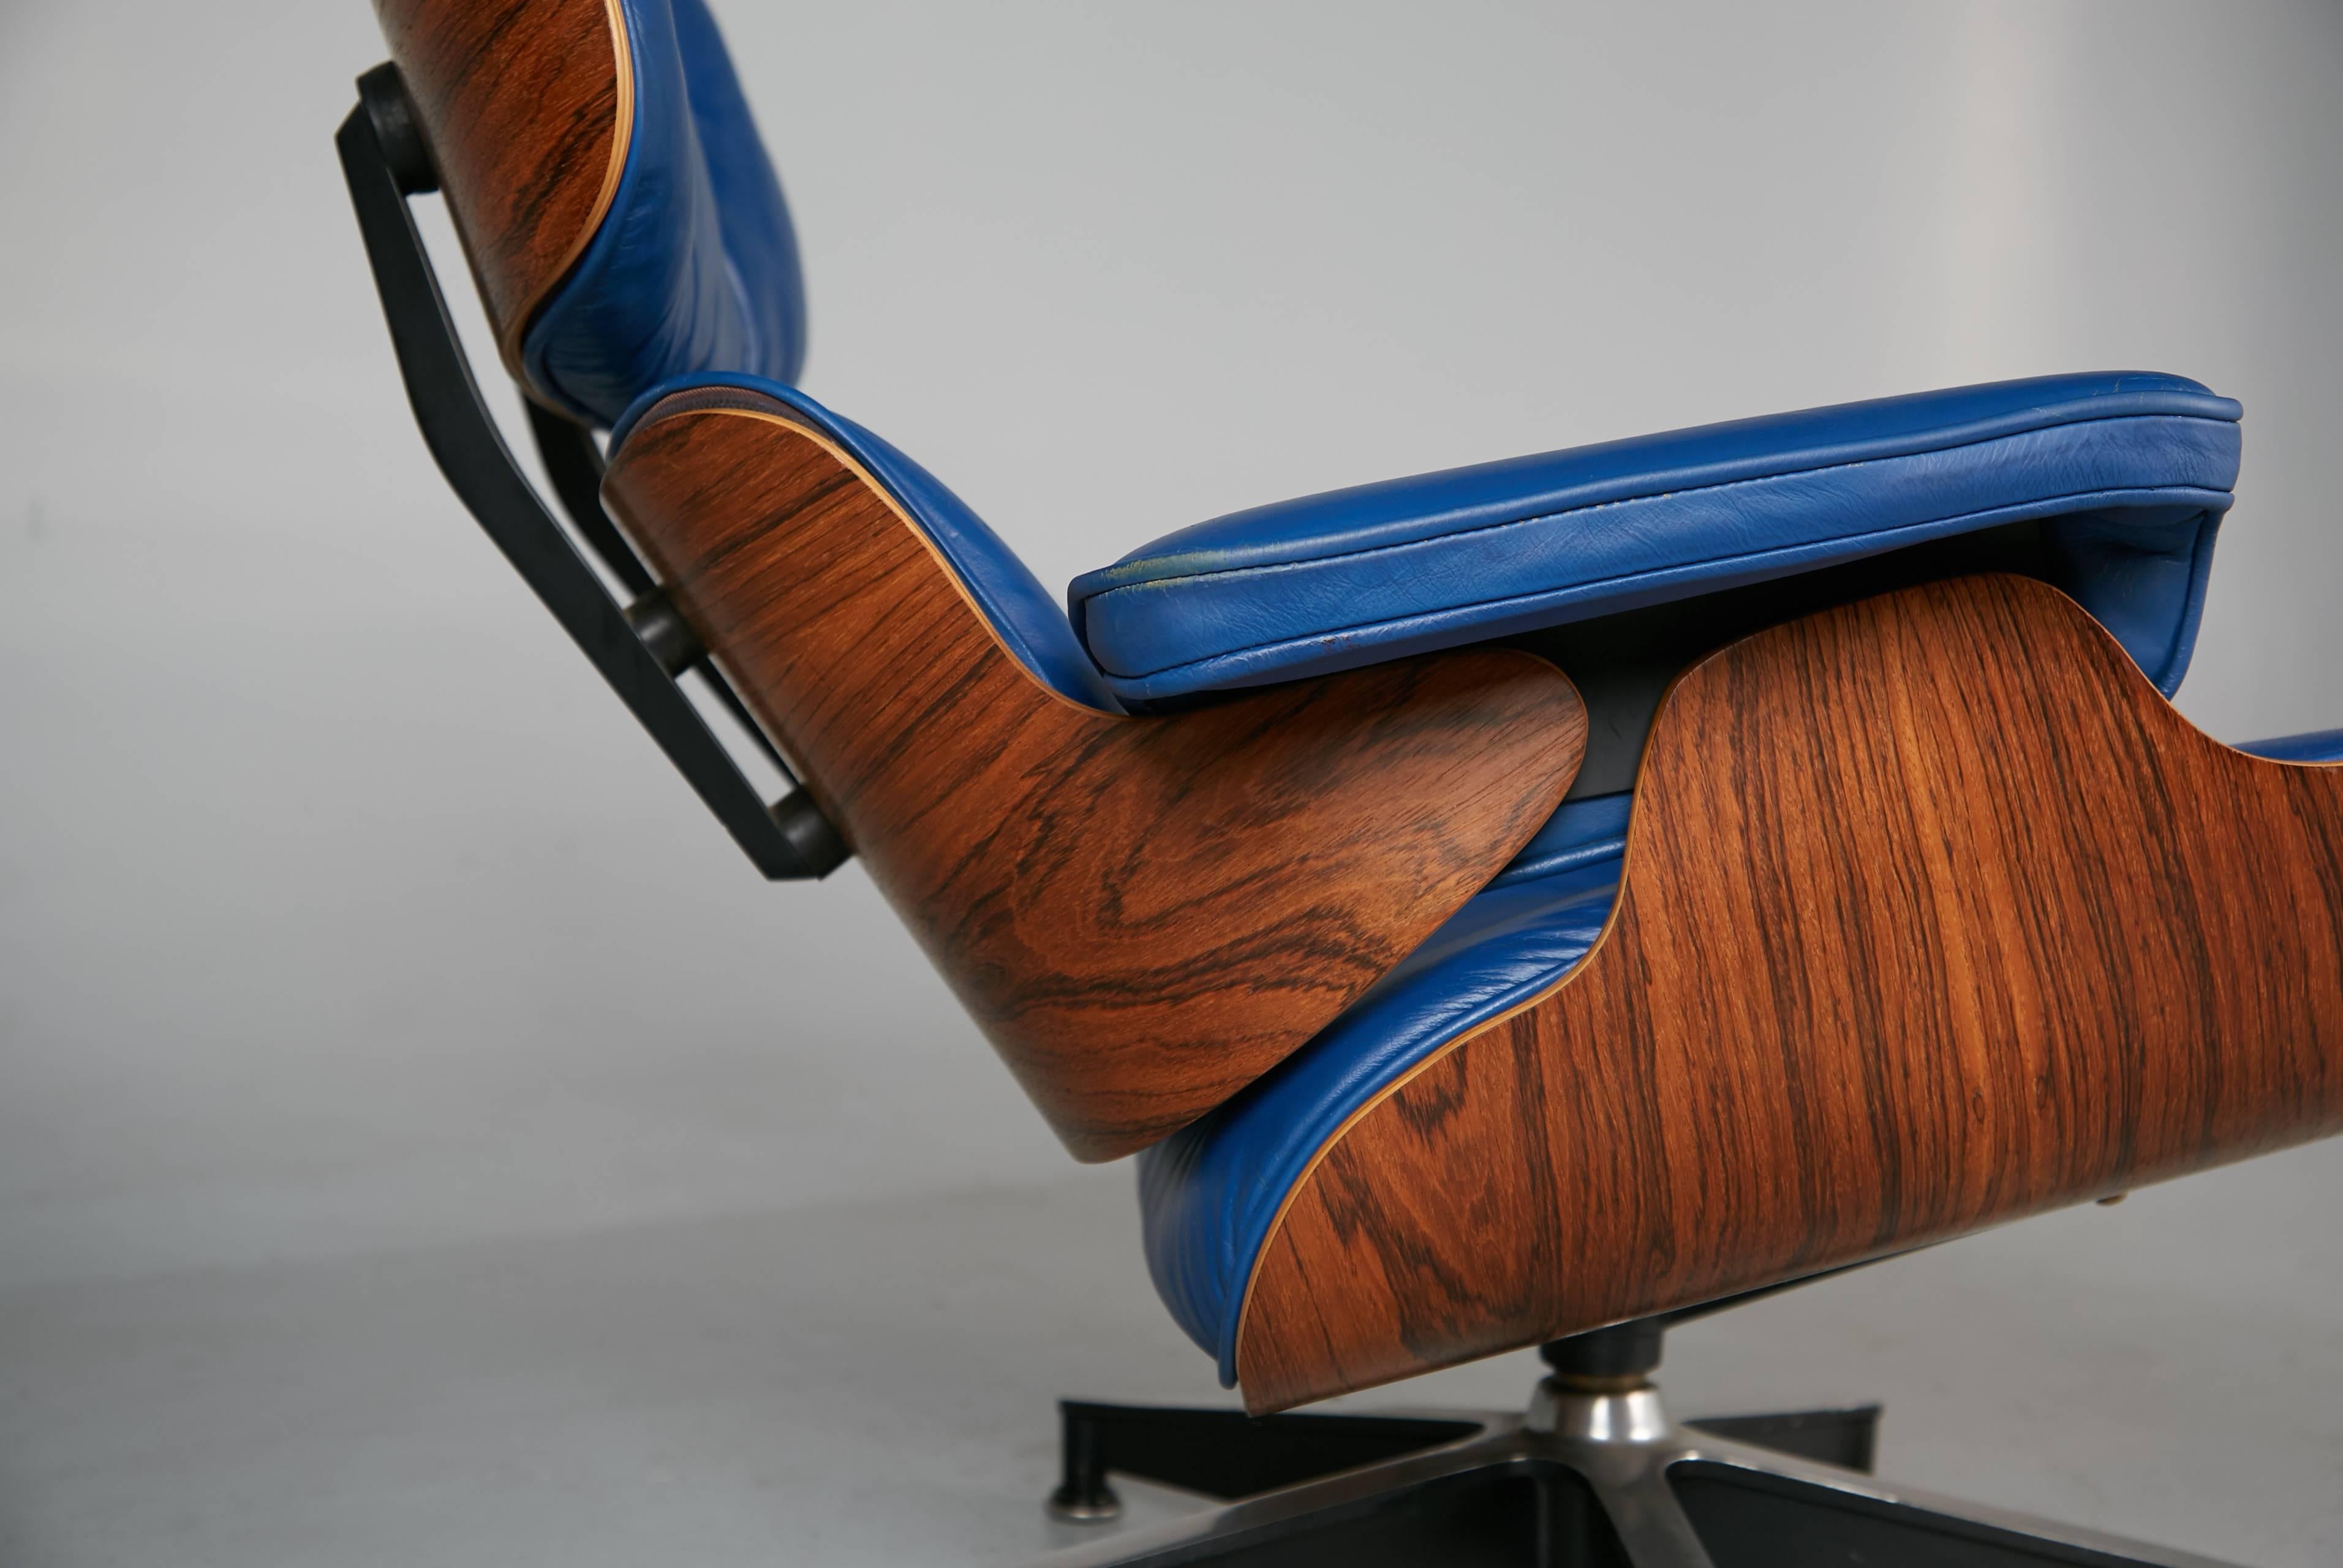 Mid-20th Century Blue Leather and Rosewood Eames Lounge Chair 670 for Herman Miller, circa 1960